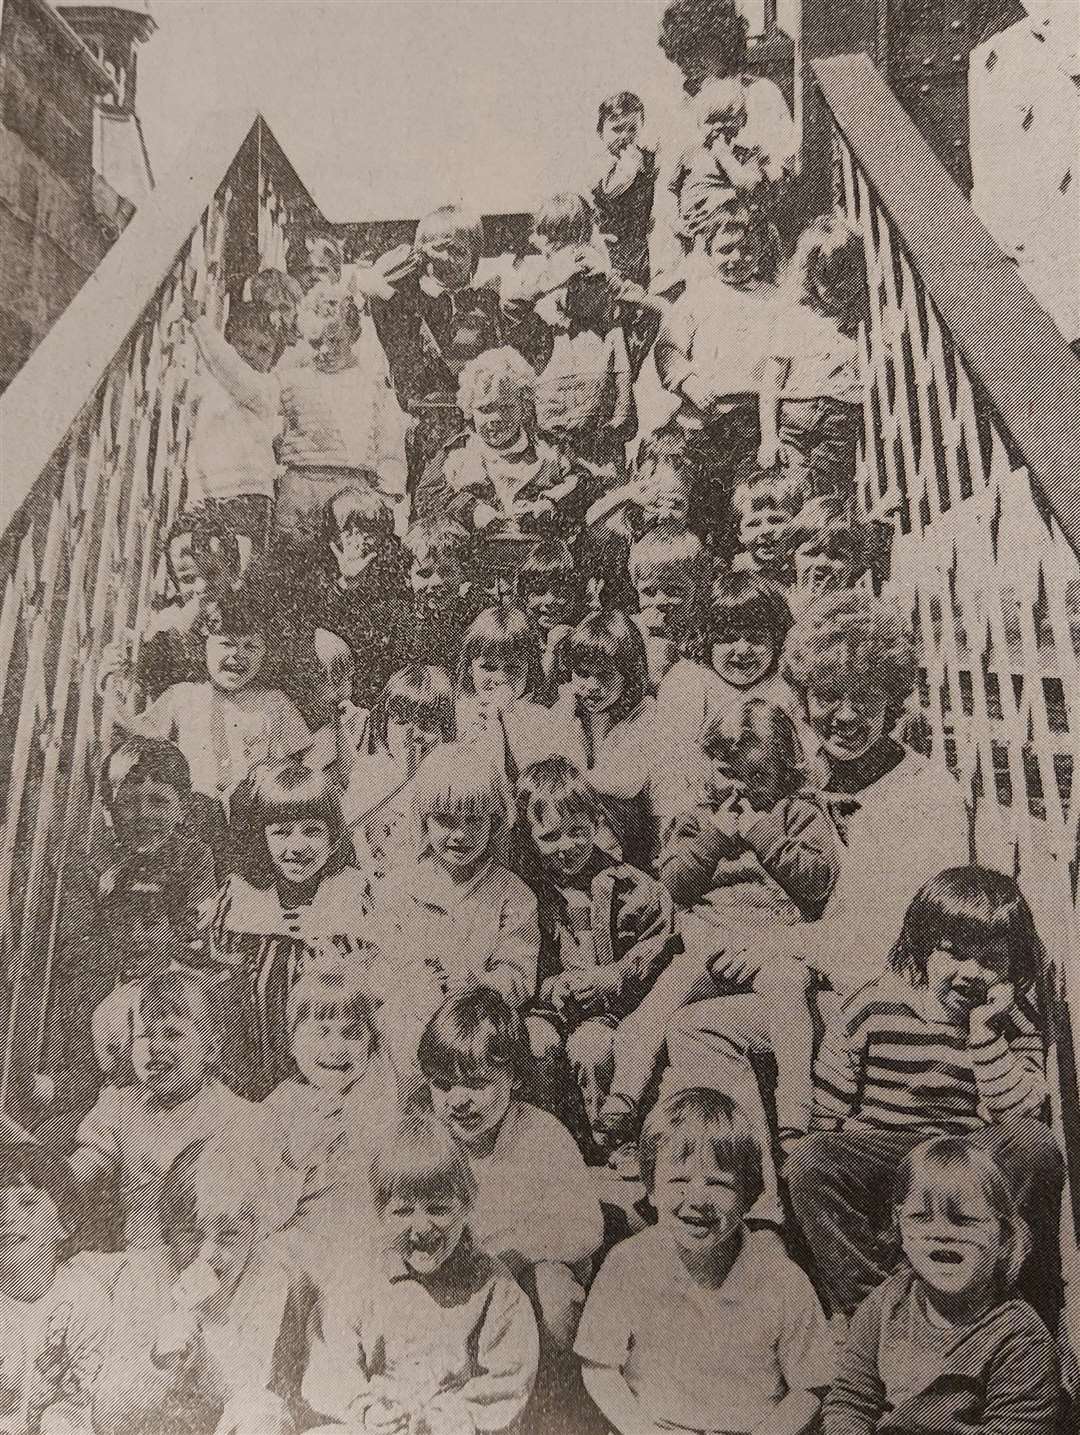 51 children from Fyvie Playgroup enjoyed a bus trip to Duthie Park, returning by train to Inverurie. (Turriff Advertiser 1988)